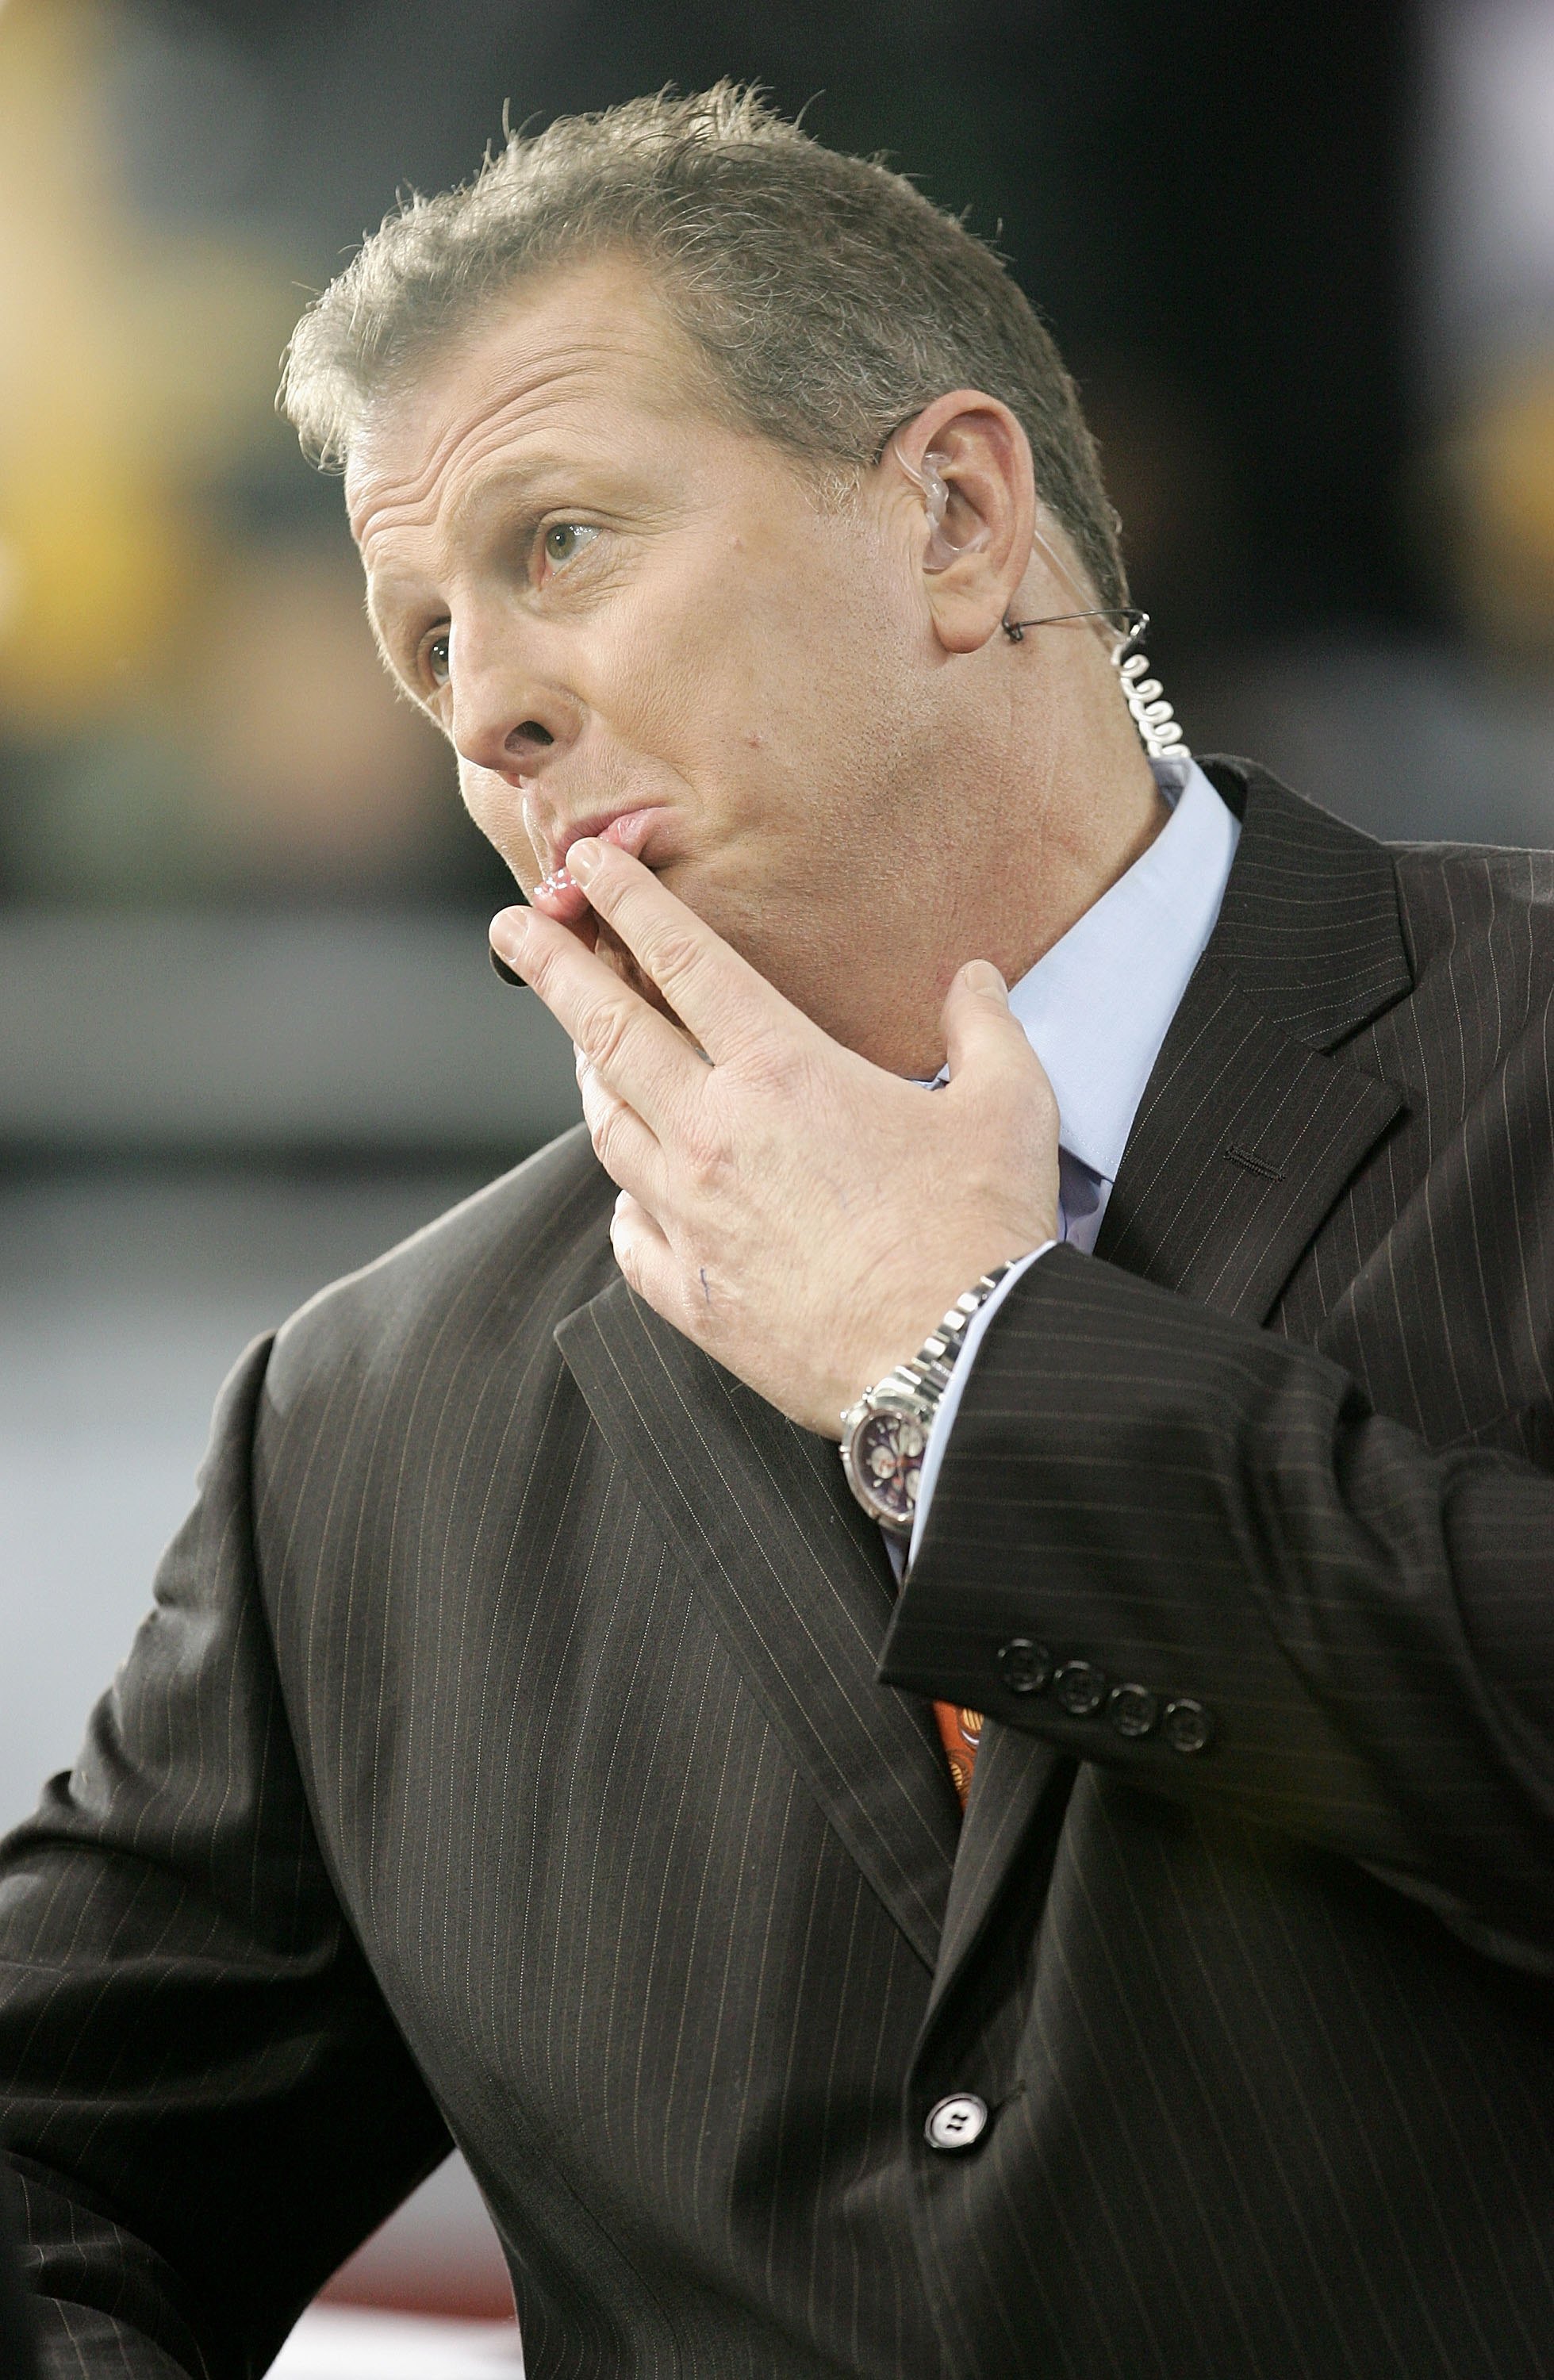 DETROIT - FEBRUARY 05:  Sport analyst Sean Salisbury on the set of ABC's pregame show before the start of Super Bowl XL between the Pittsburgh Steelers and the Seattle Seahawks at Ford Field on February 5, 2006 in Detroit, Michigan.  (Photo by Jonathan Da